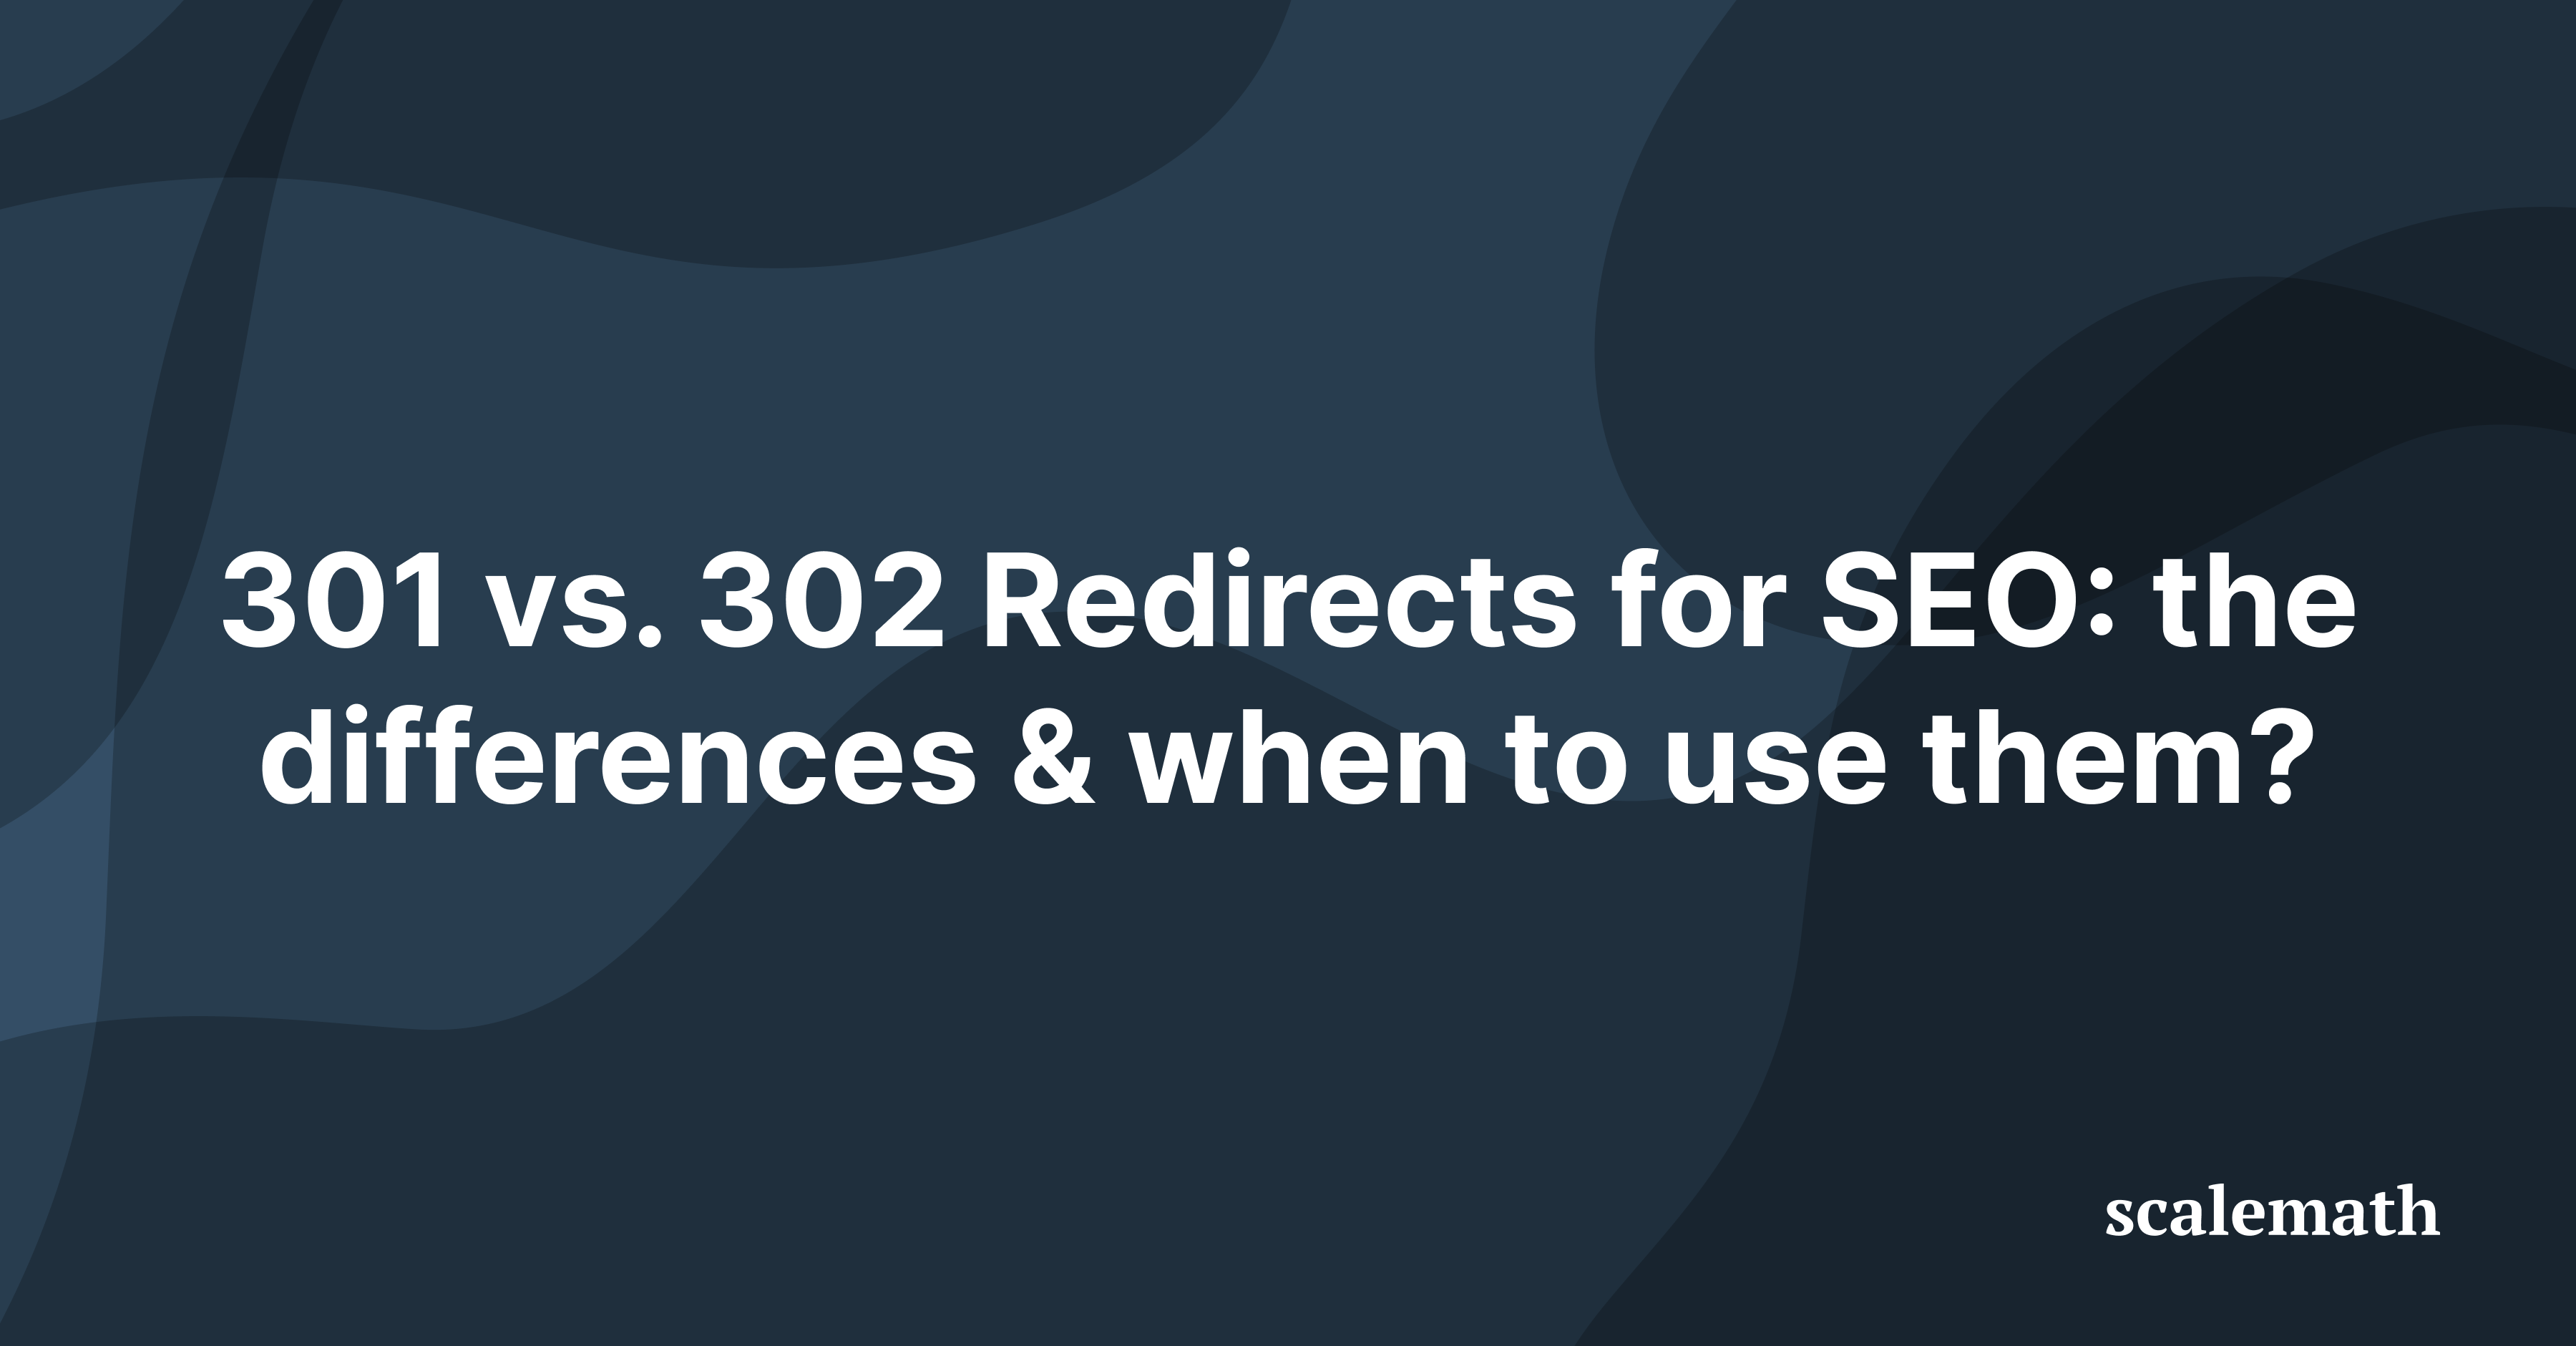 301 vs. 302 Redirects for SEO: the differences & when to use them?